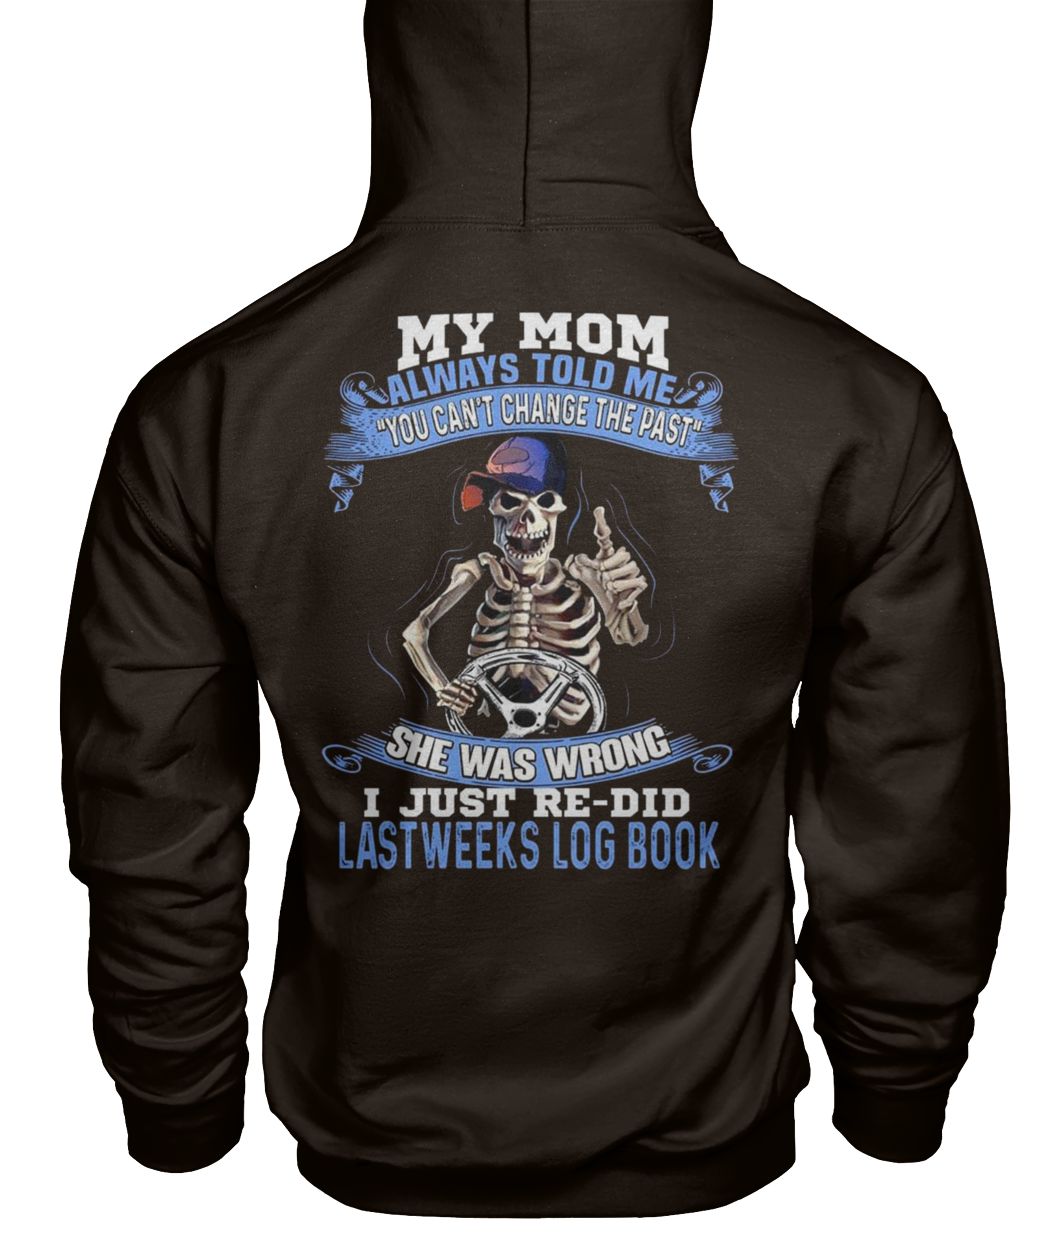 My mom always told me you can't change the past gildan hoodie